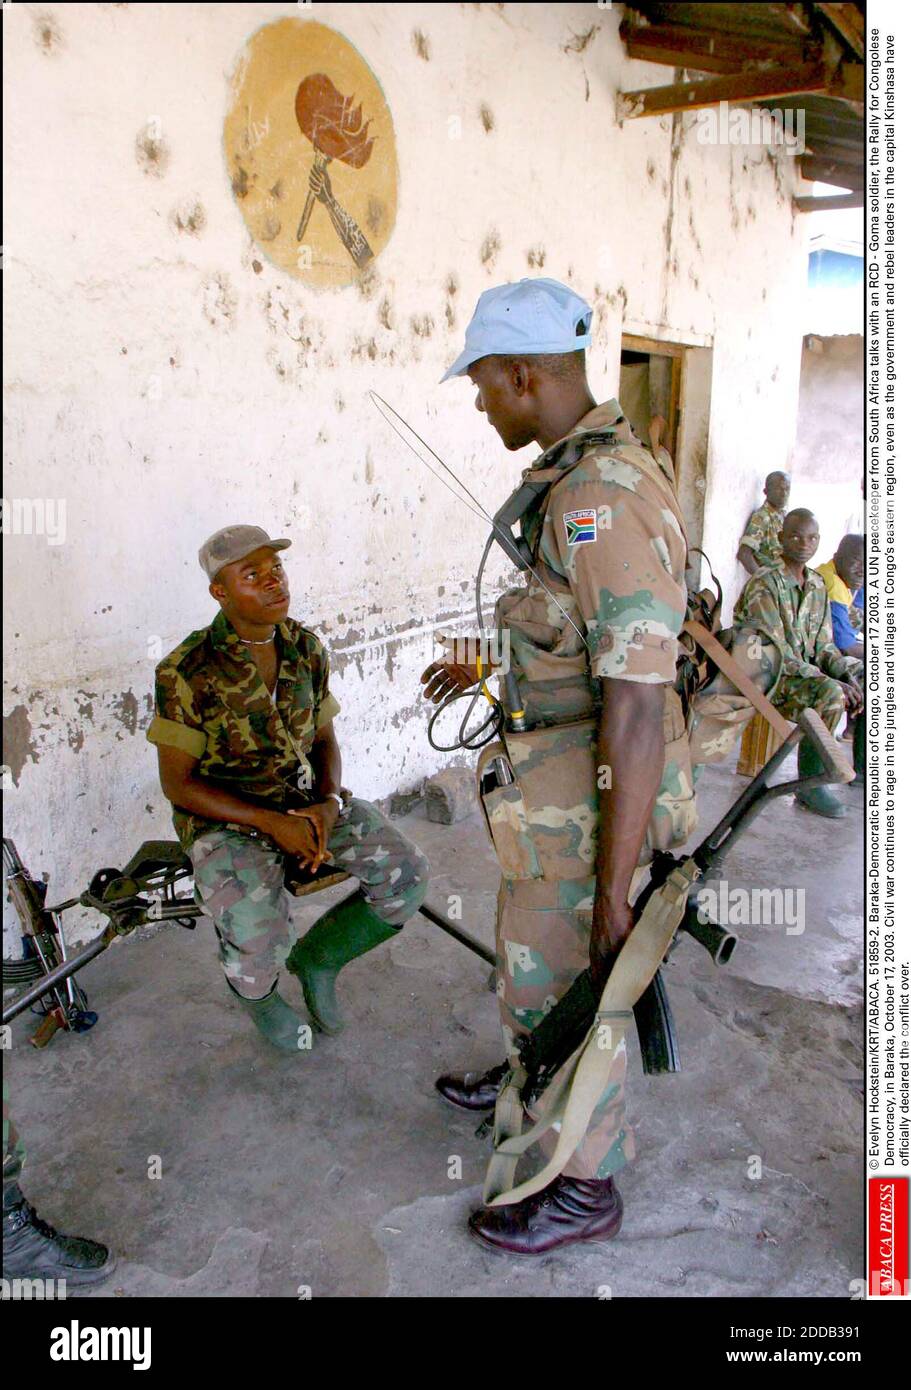 NO FILM, NO VIDEO, NO TV, NO DOCUMENTARY - © Evelyn Hockstein/KRT/ABACA. 51859-2. Baraka-Democratic Republic of Congo, October 17 2003. A UN peacekeeper from South Africa talks with an RCD - Goma soldier, the Rally for Congolese Democracy, in Baraka, October 17, 2003. Civil war continues to rage i Stock Photo